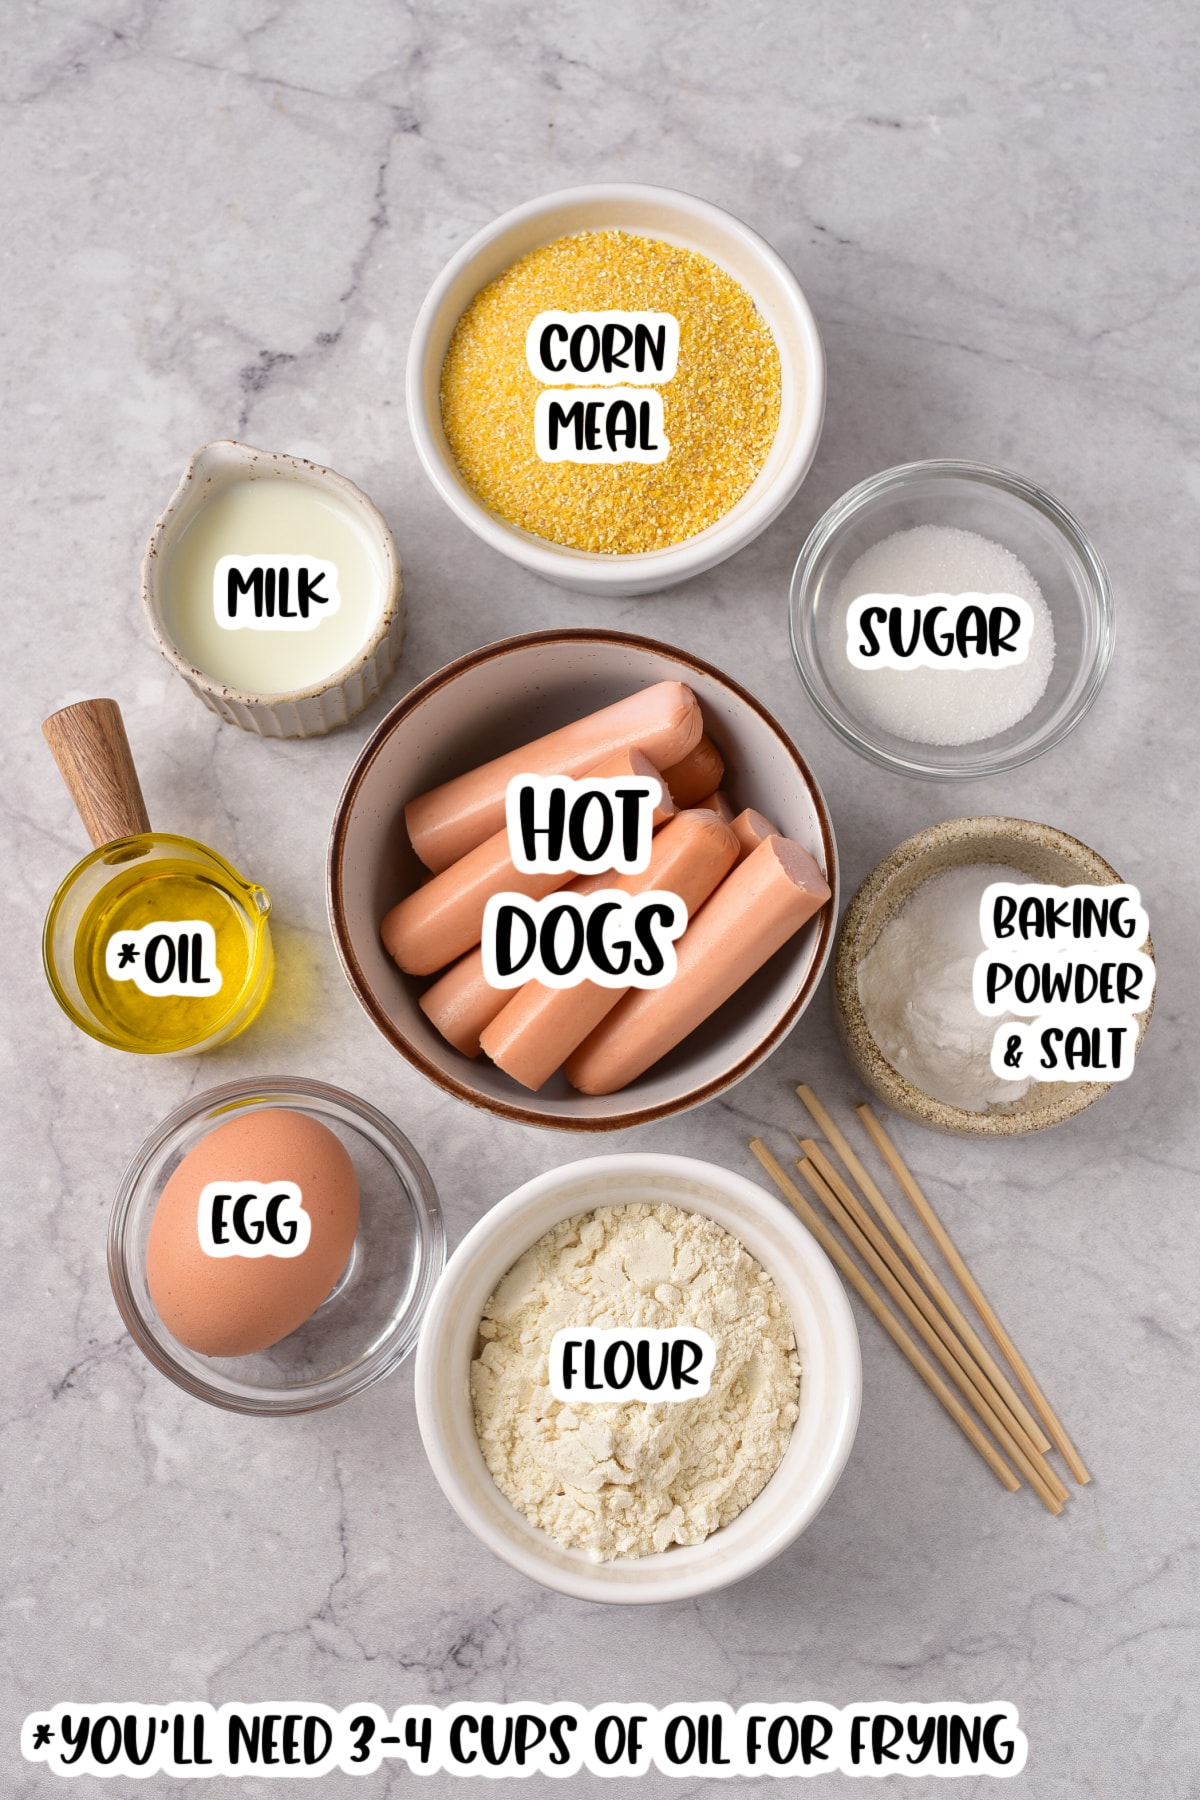 Ingredients for corn dogs labeled